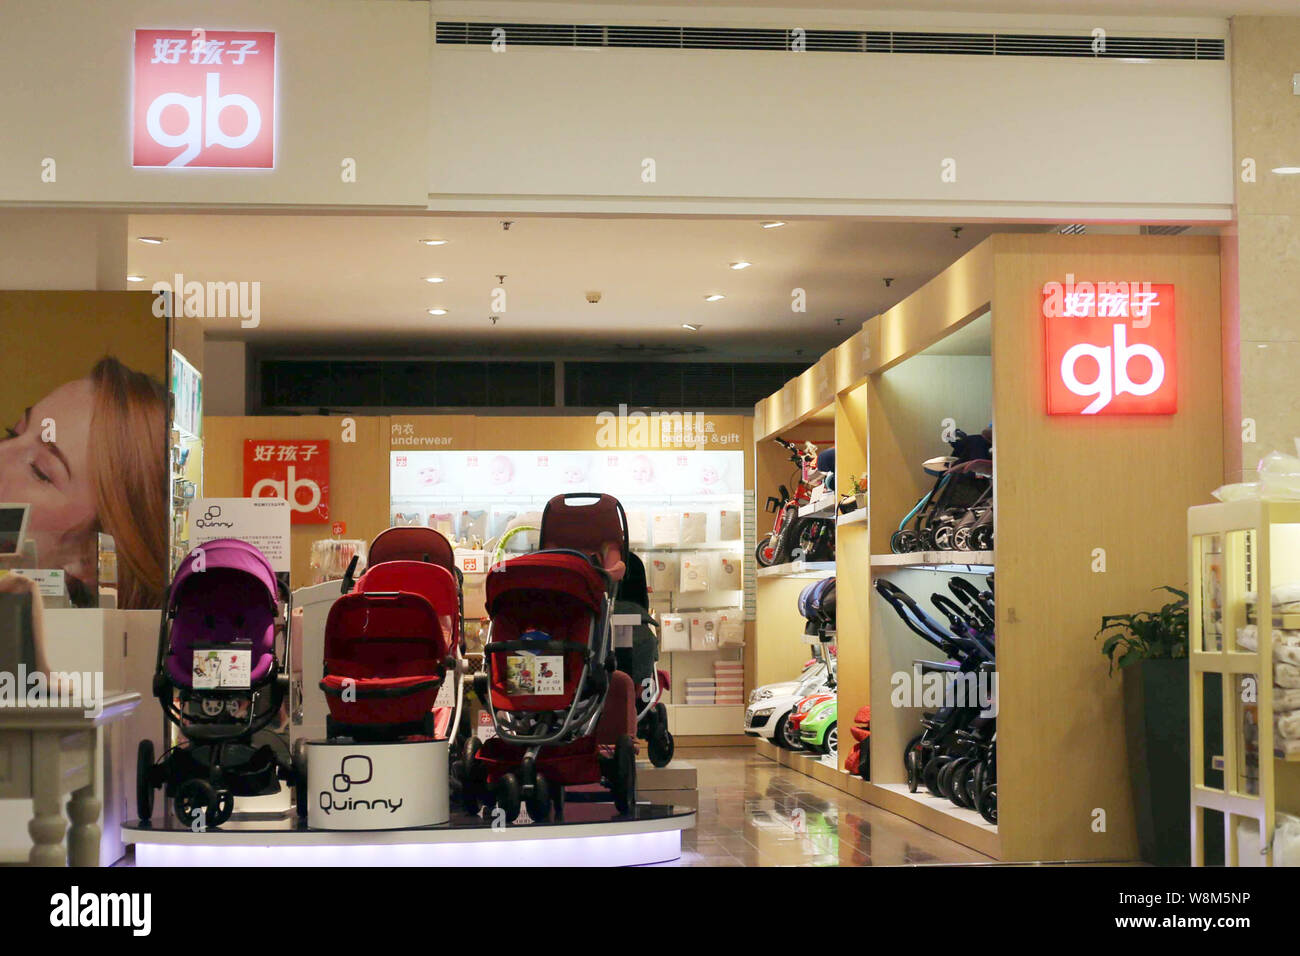 --FILE--Baby strollers and other baby products are for sale in a shop of Goodbaby (gb) at a shopping mall in Shanghai, China, 19 November 2015.   Good Stock Photo